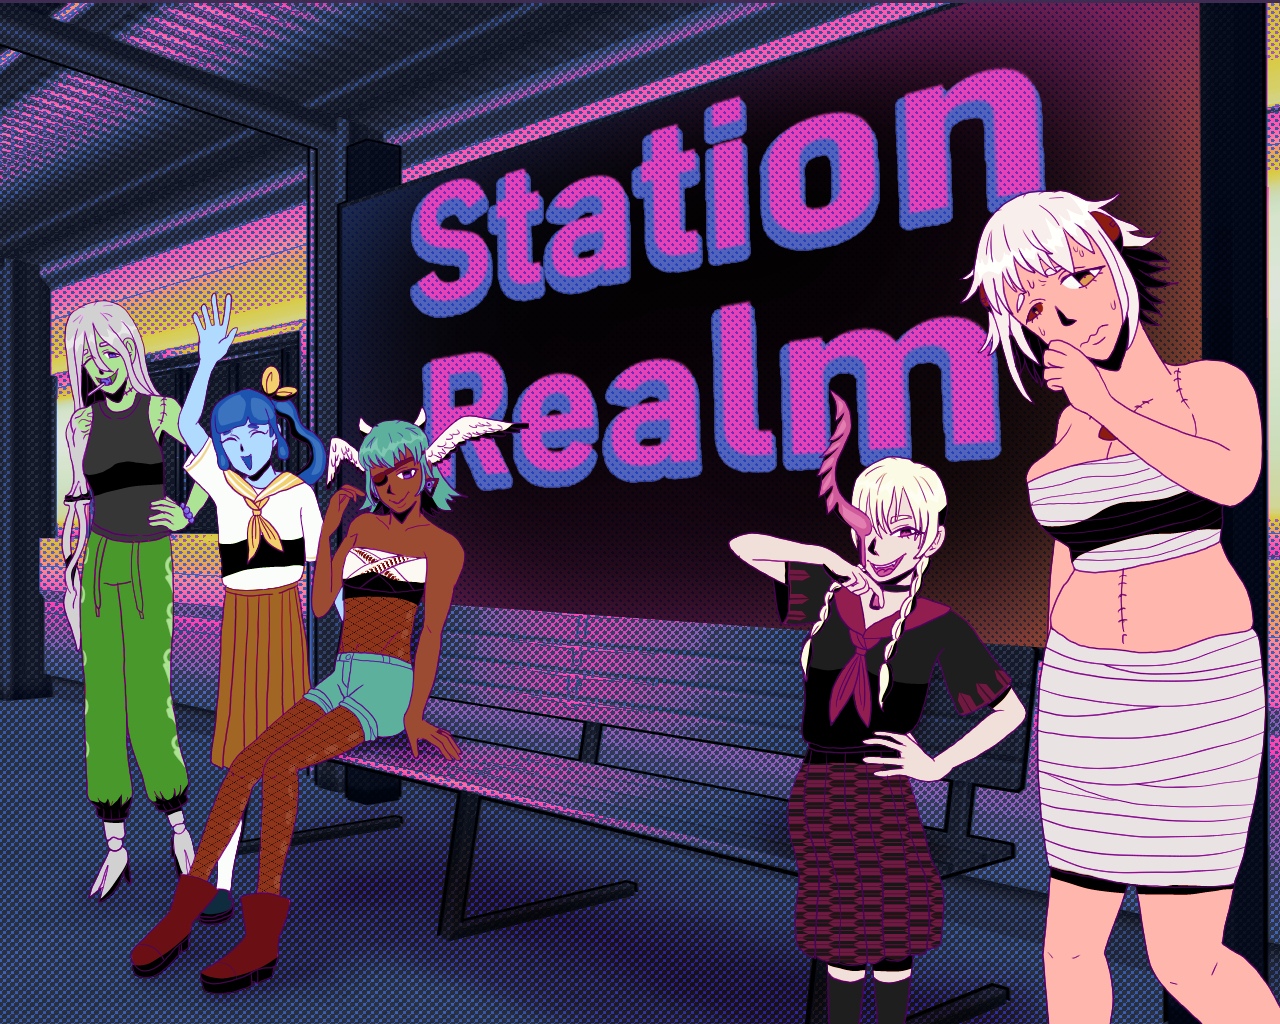 Station Realm